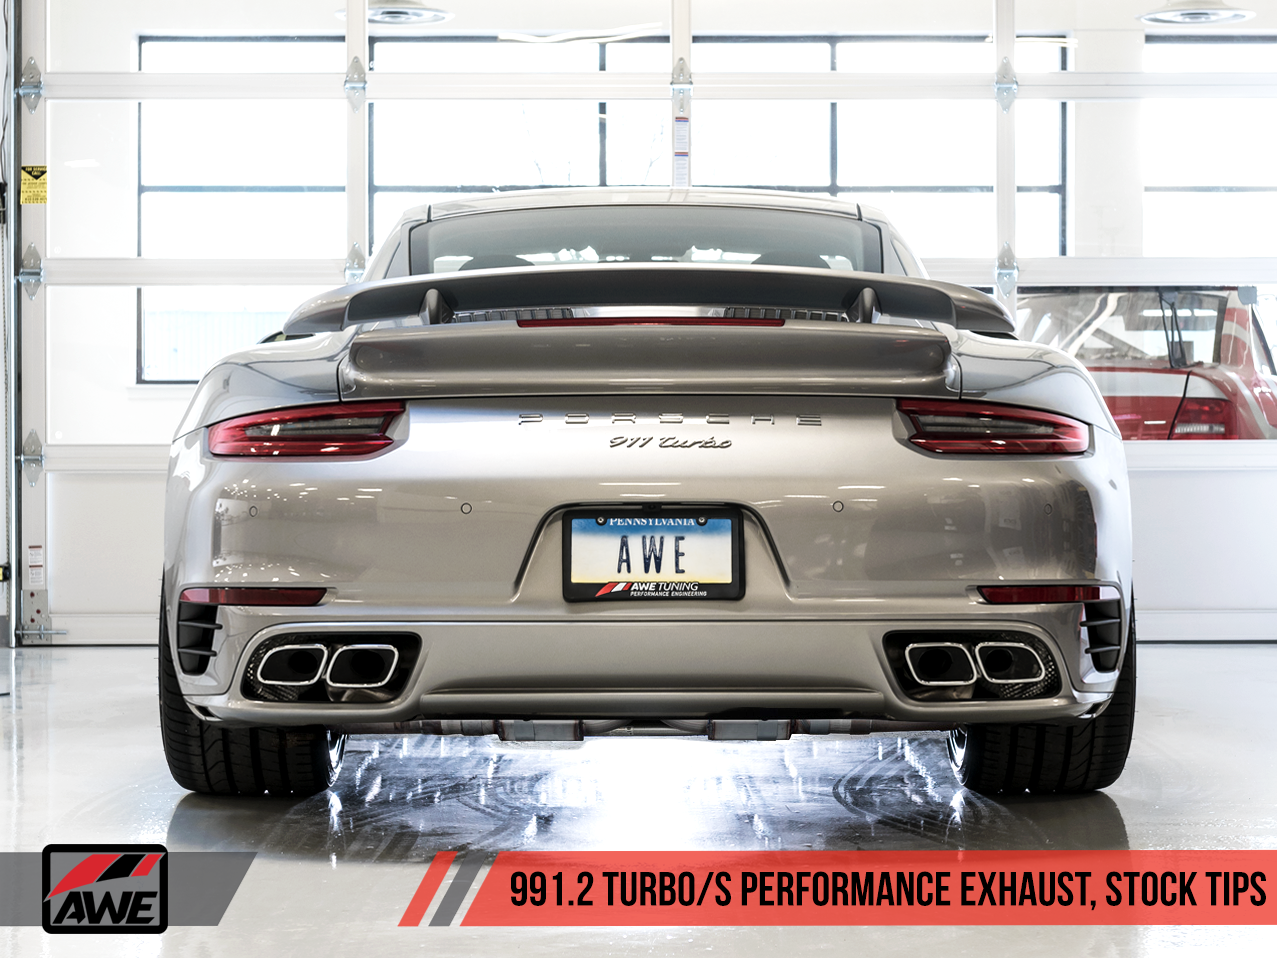 AWE Performance Exhaust and High-Flow Cat Sections for Porsche 991.2 Turbo - Stock Tips